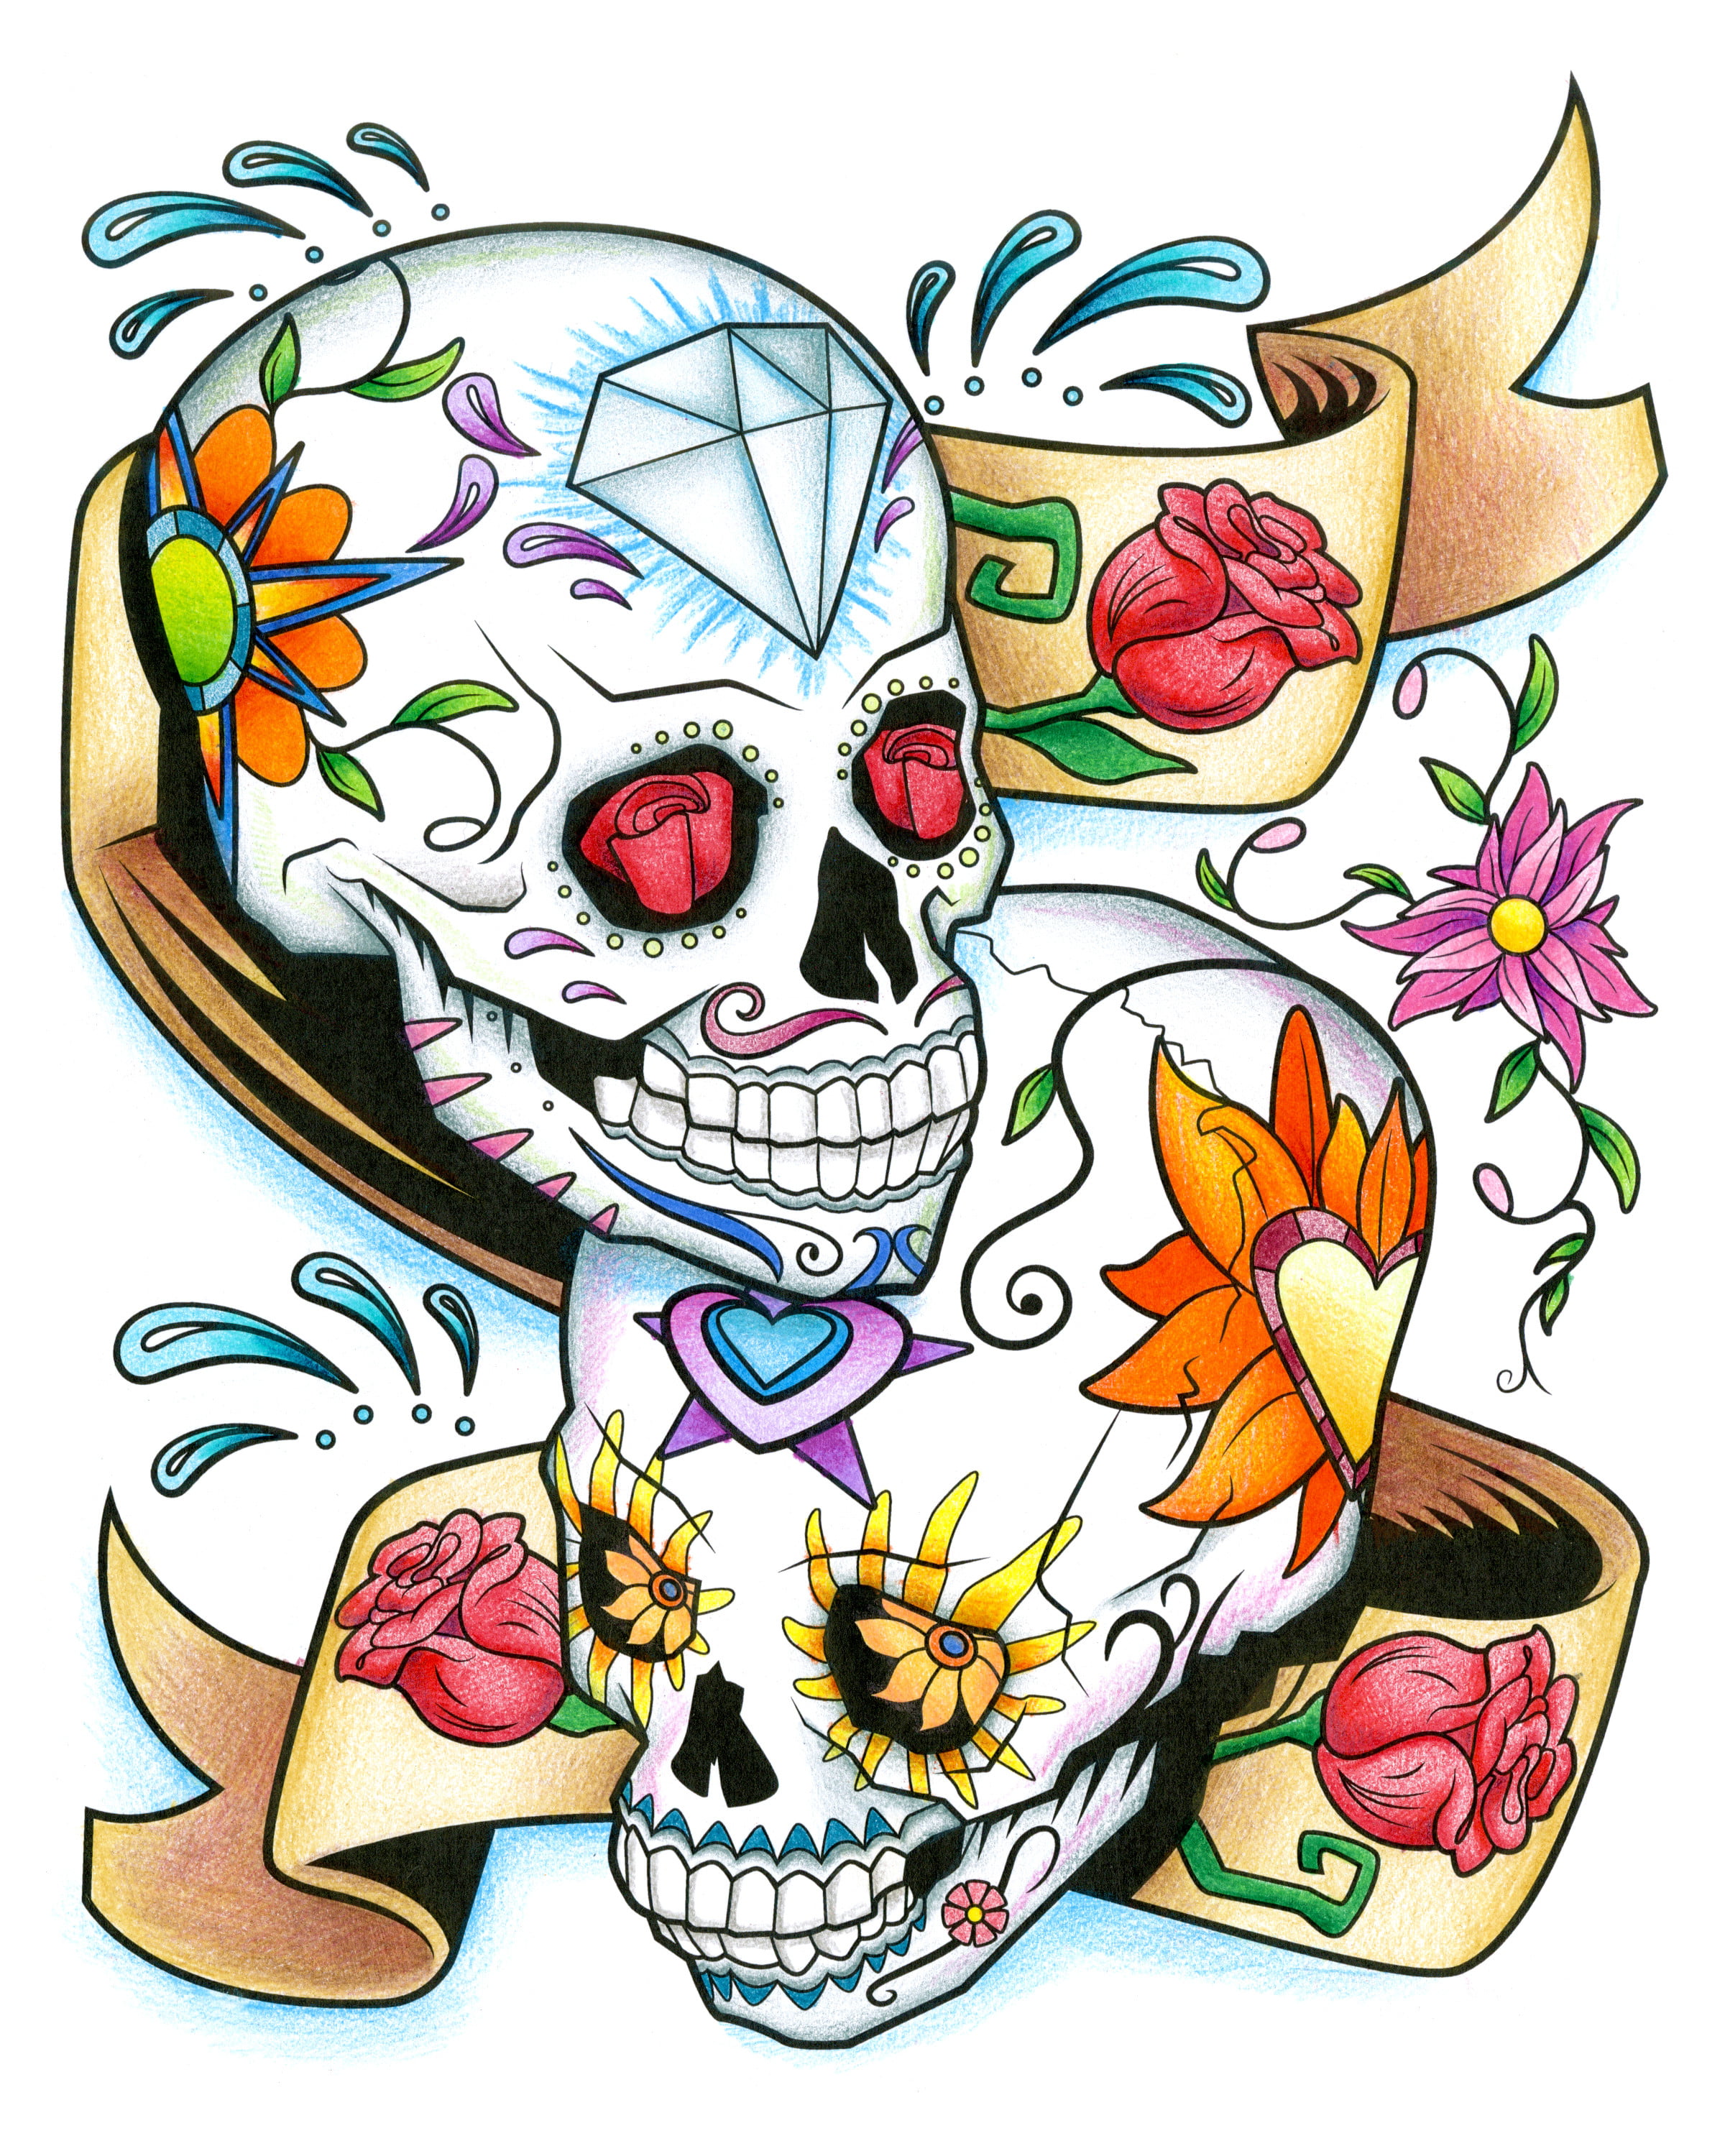 Crayola Art with Edge Sugar Skulls Coloring Books, 40 Pages 